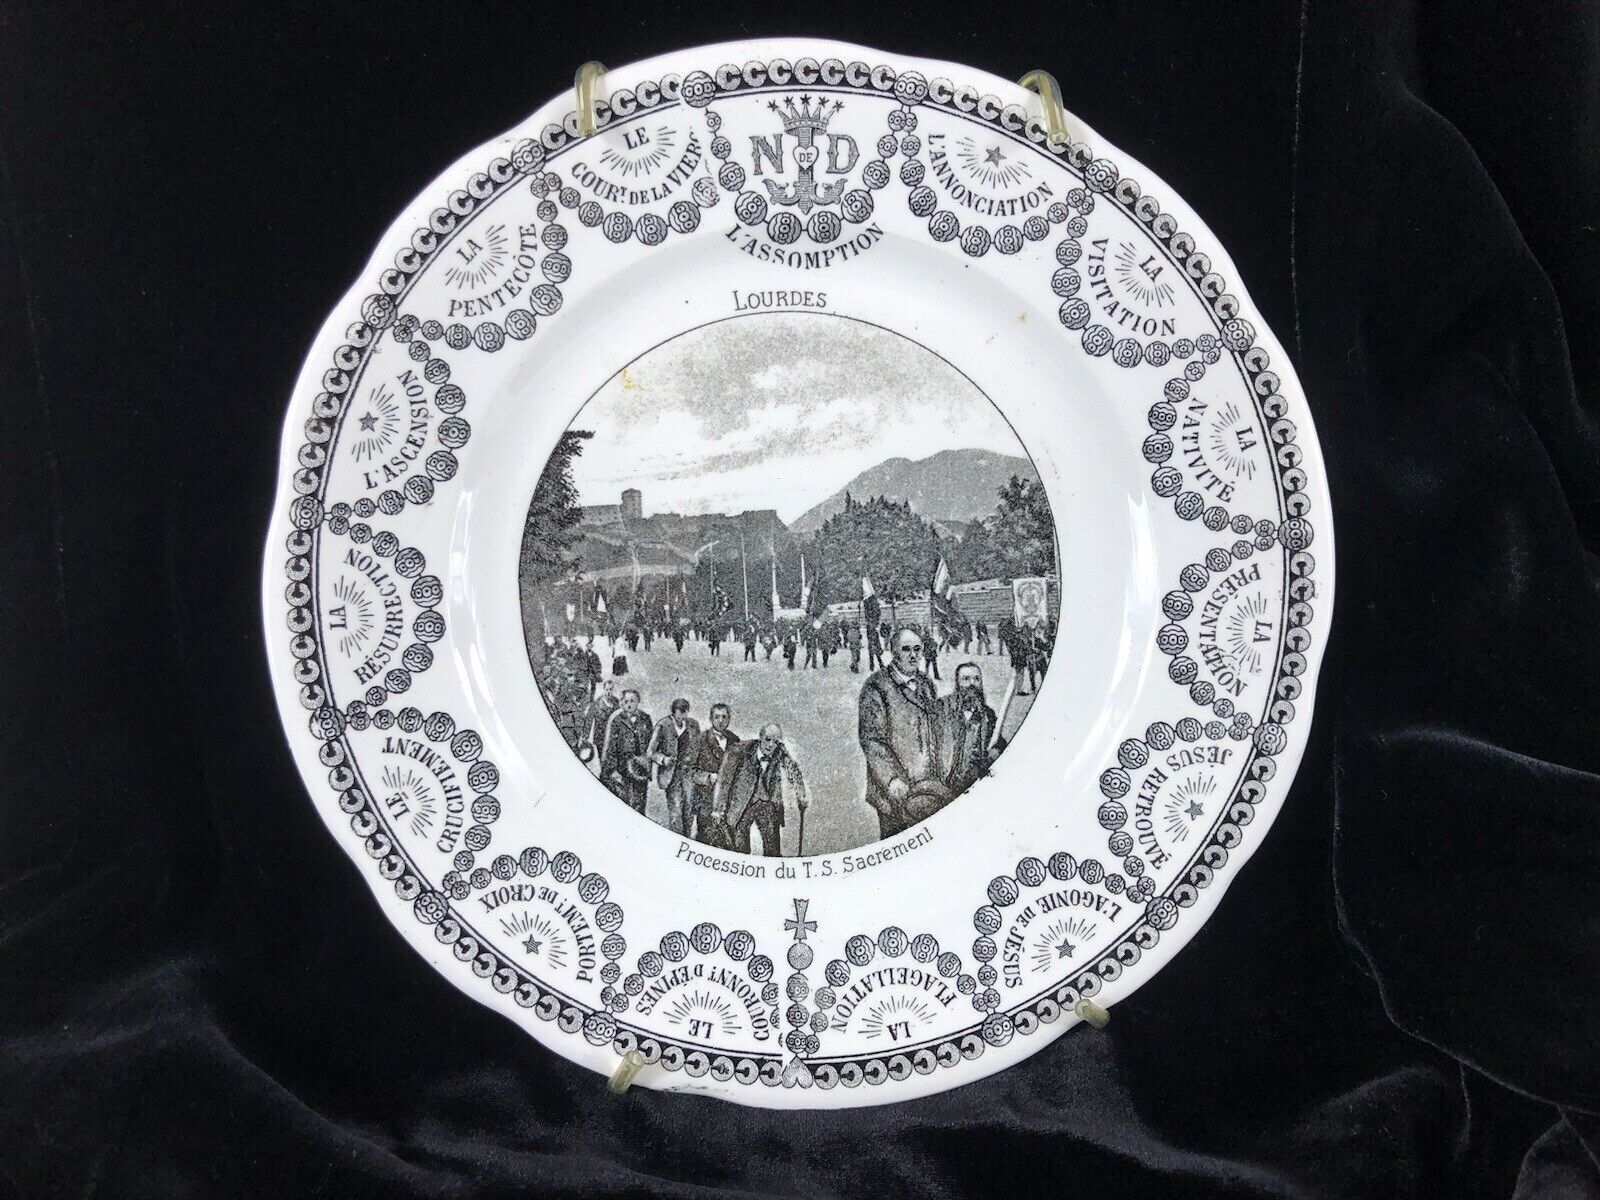 Vtg Sarreguimines Collector’s Plate Honoring French Pilgrimage Site/Lourdes